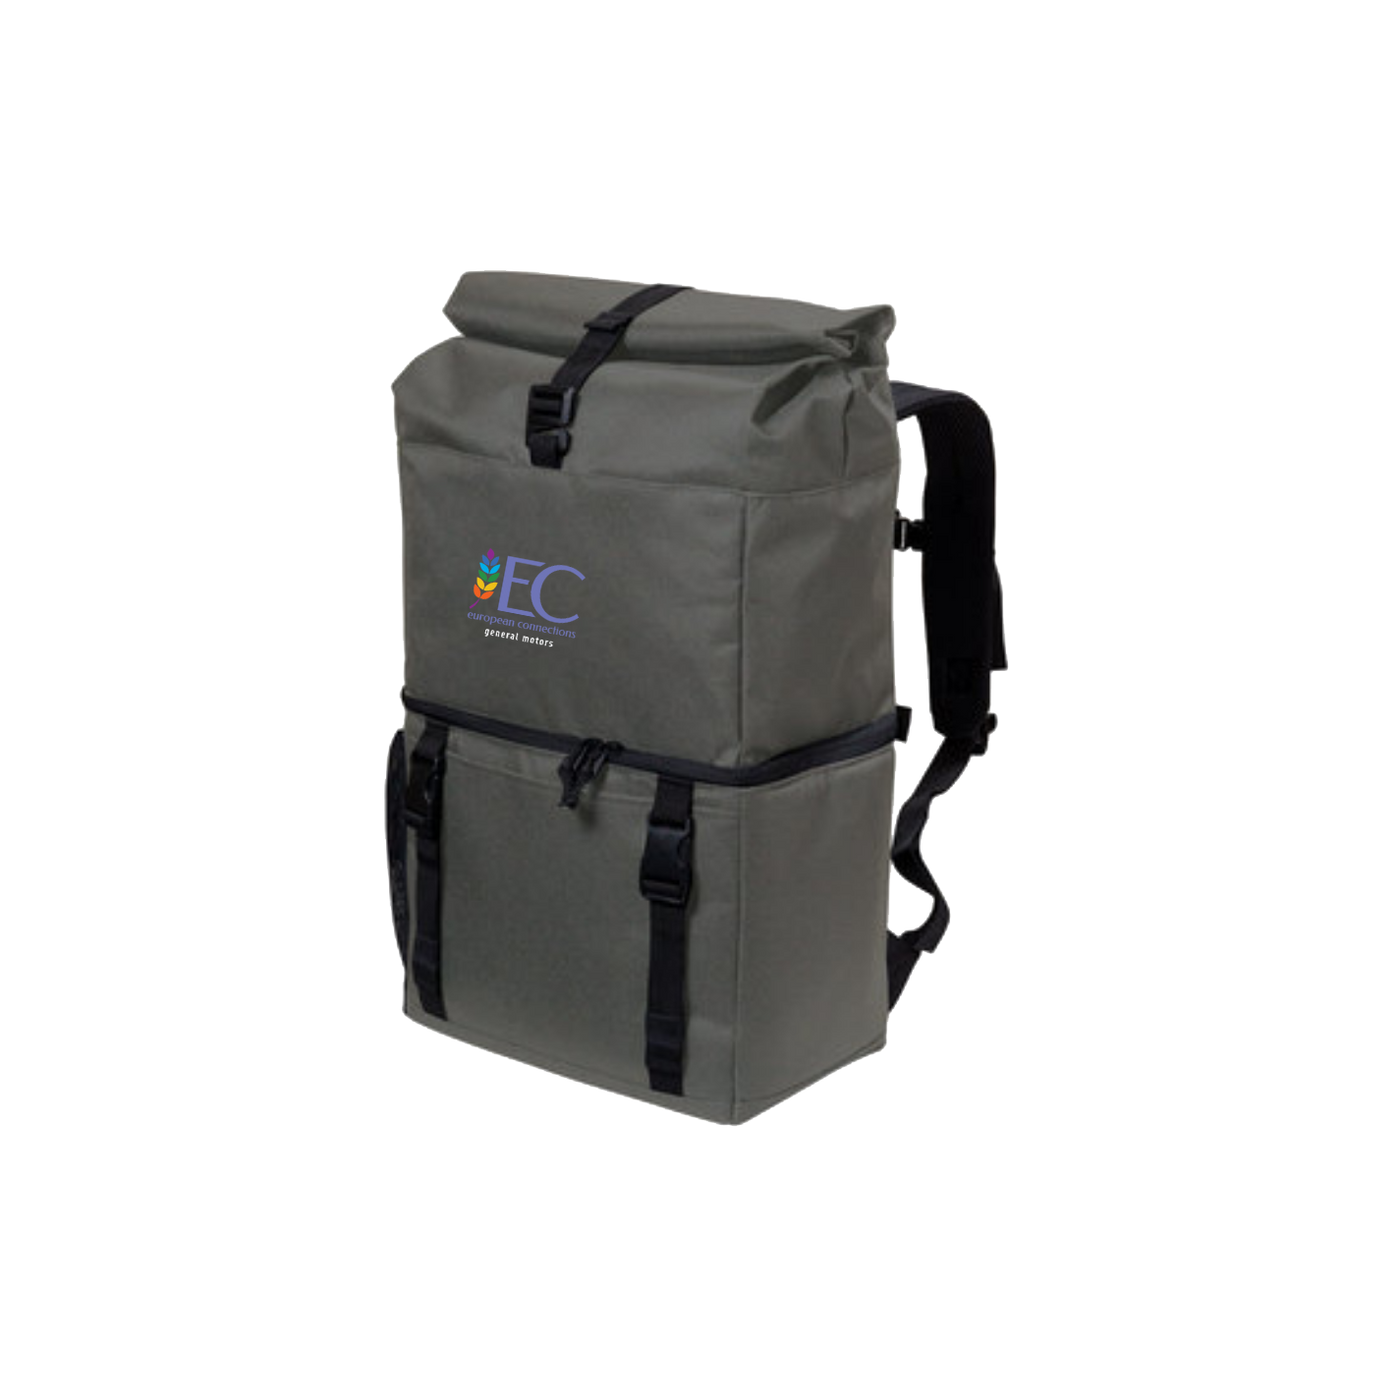 GM European Connections ERG Backpack Cooler